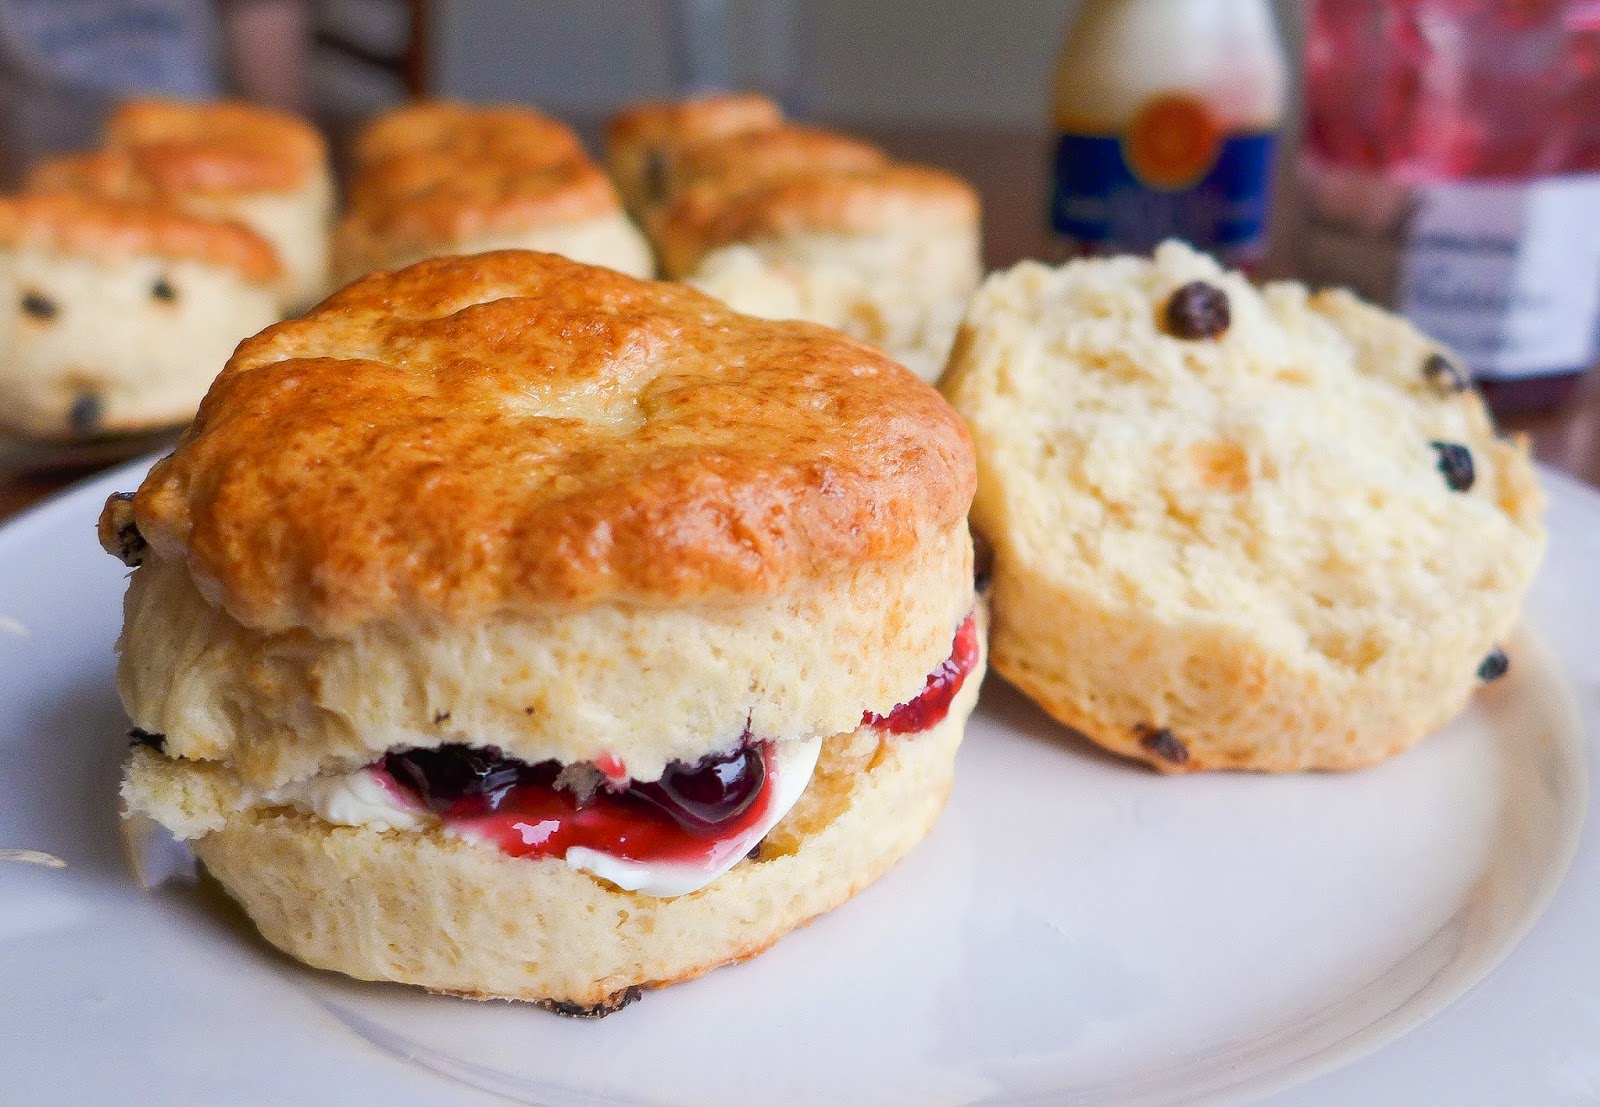 Dimples Delights Classic British Scones With Currants